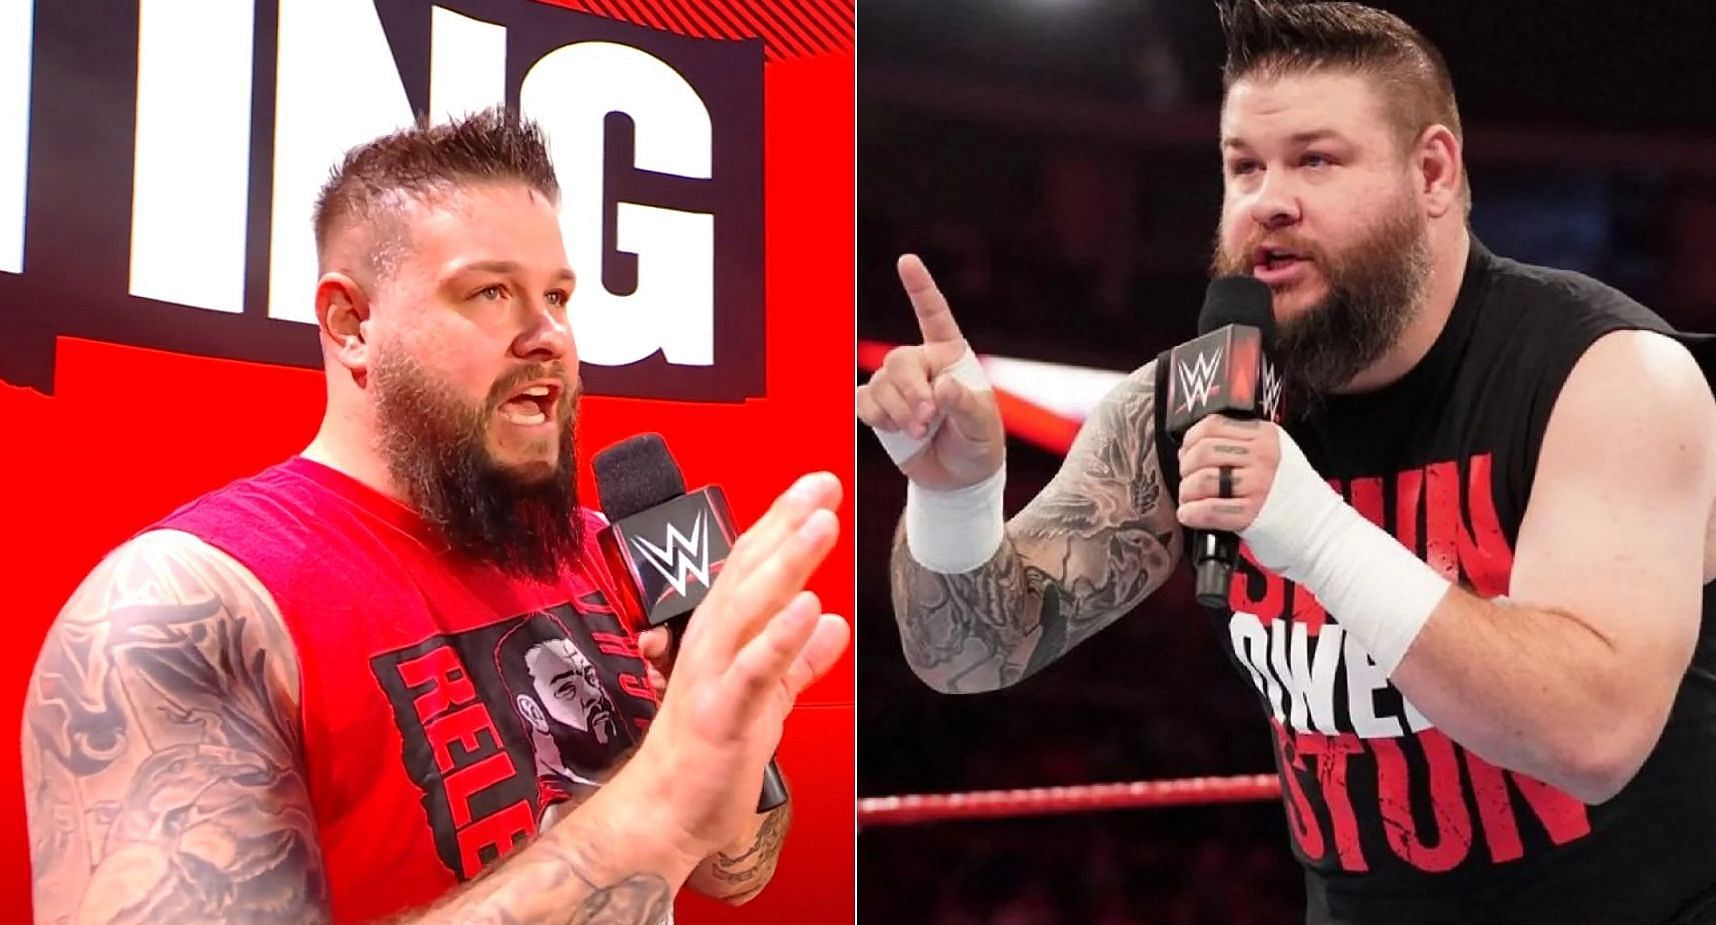 Kevin Owens is a former Universal Champion.